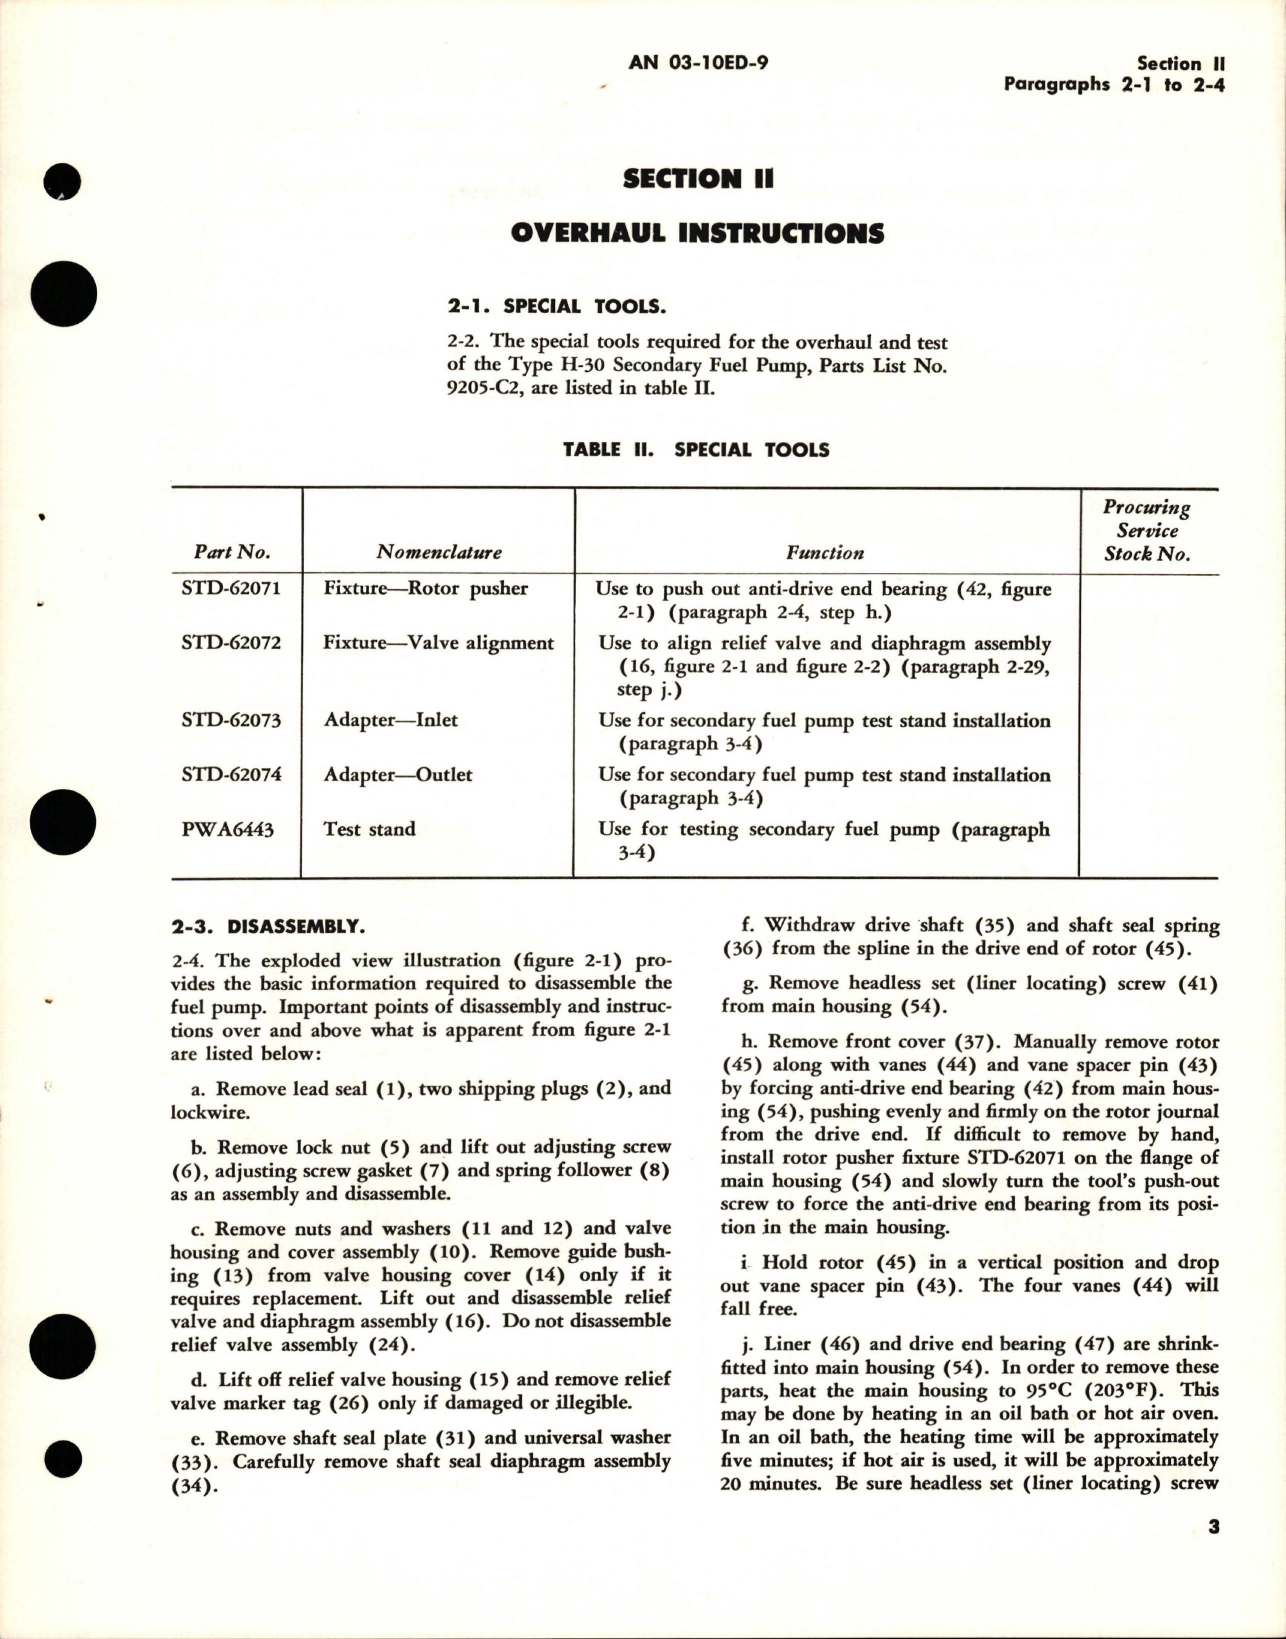 Sample page 7 from AirCorps Library document: Overhaul Instructions for Secondary Fuel Pump - Parts 9205-A1, 9205-B2 and 9205-C2